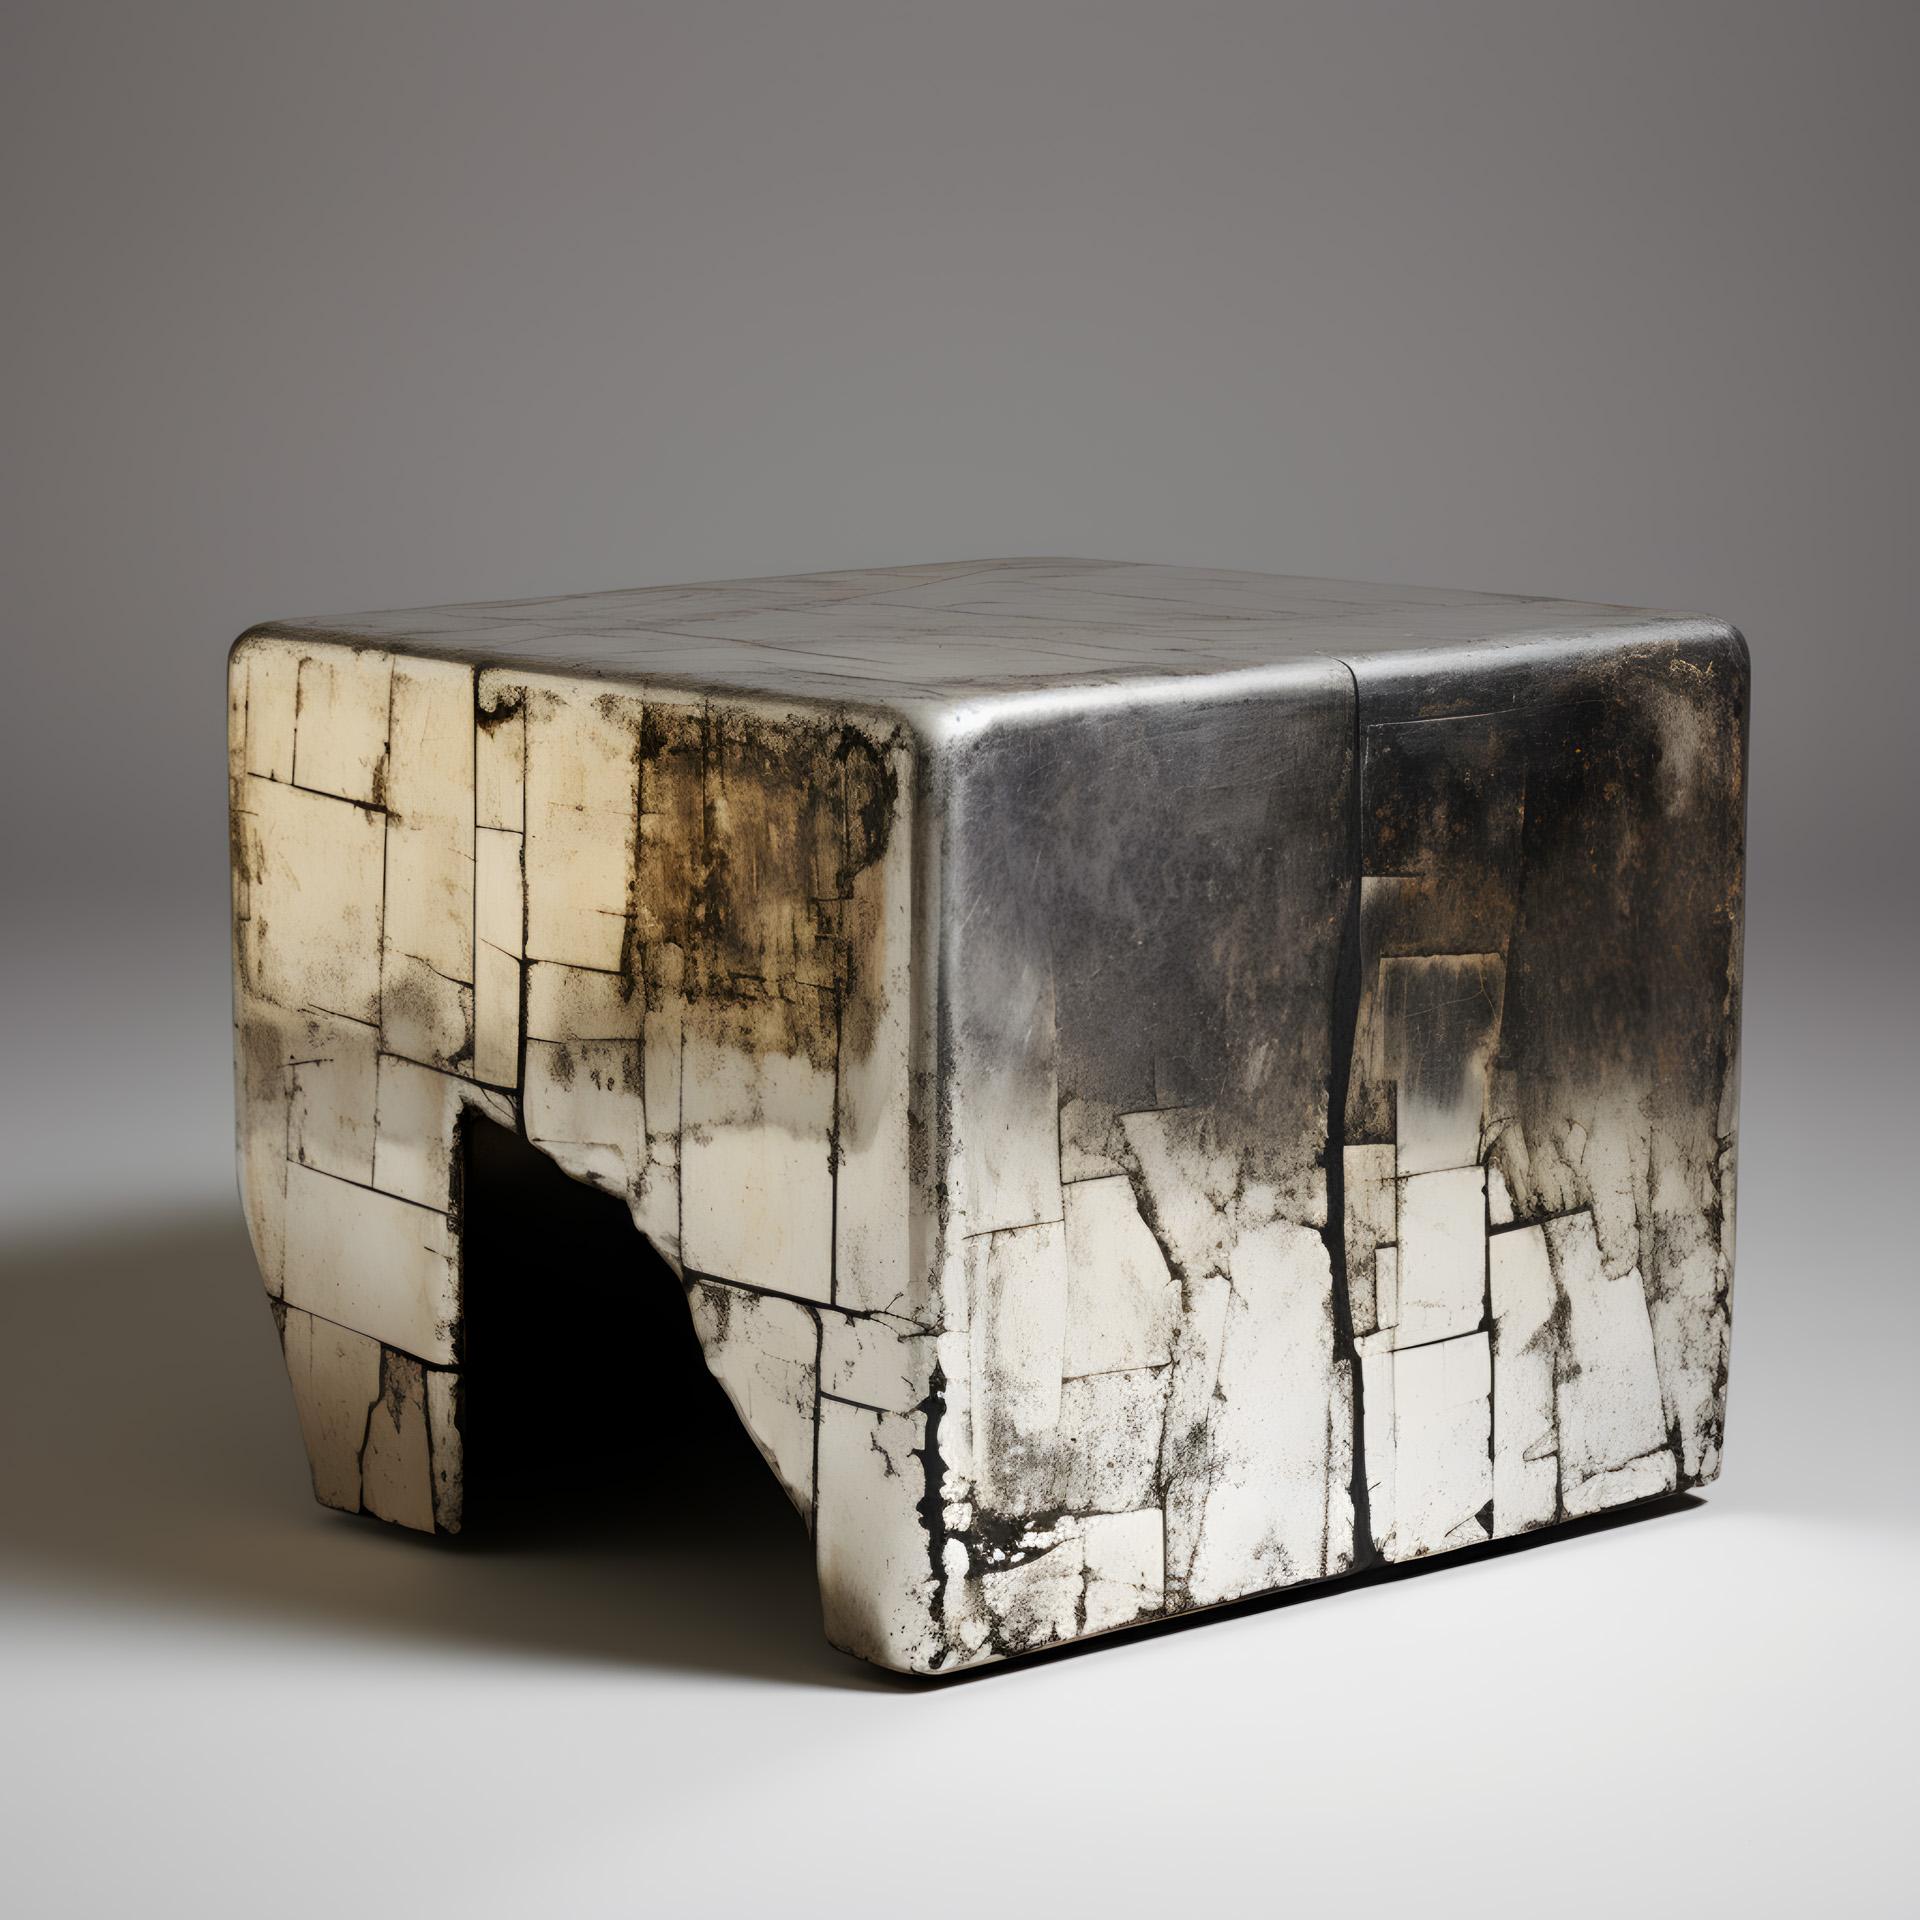 Cheng Tuo Side Table by objective OBJECT Studio
Dimensions: D 42 x W 42 x H 52 cm 
Materials: Aluminum.

objective OBJECT
an embodiment of our architectural ethos.

We represent an unwavering dedication to truth, impartiality, and the profound